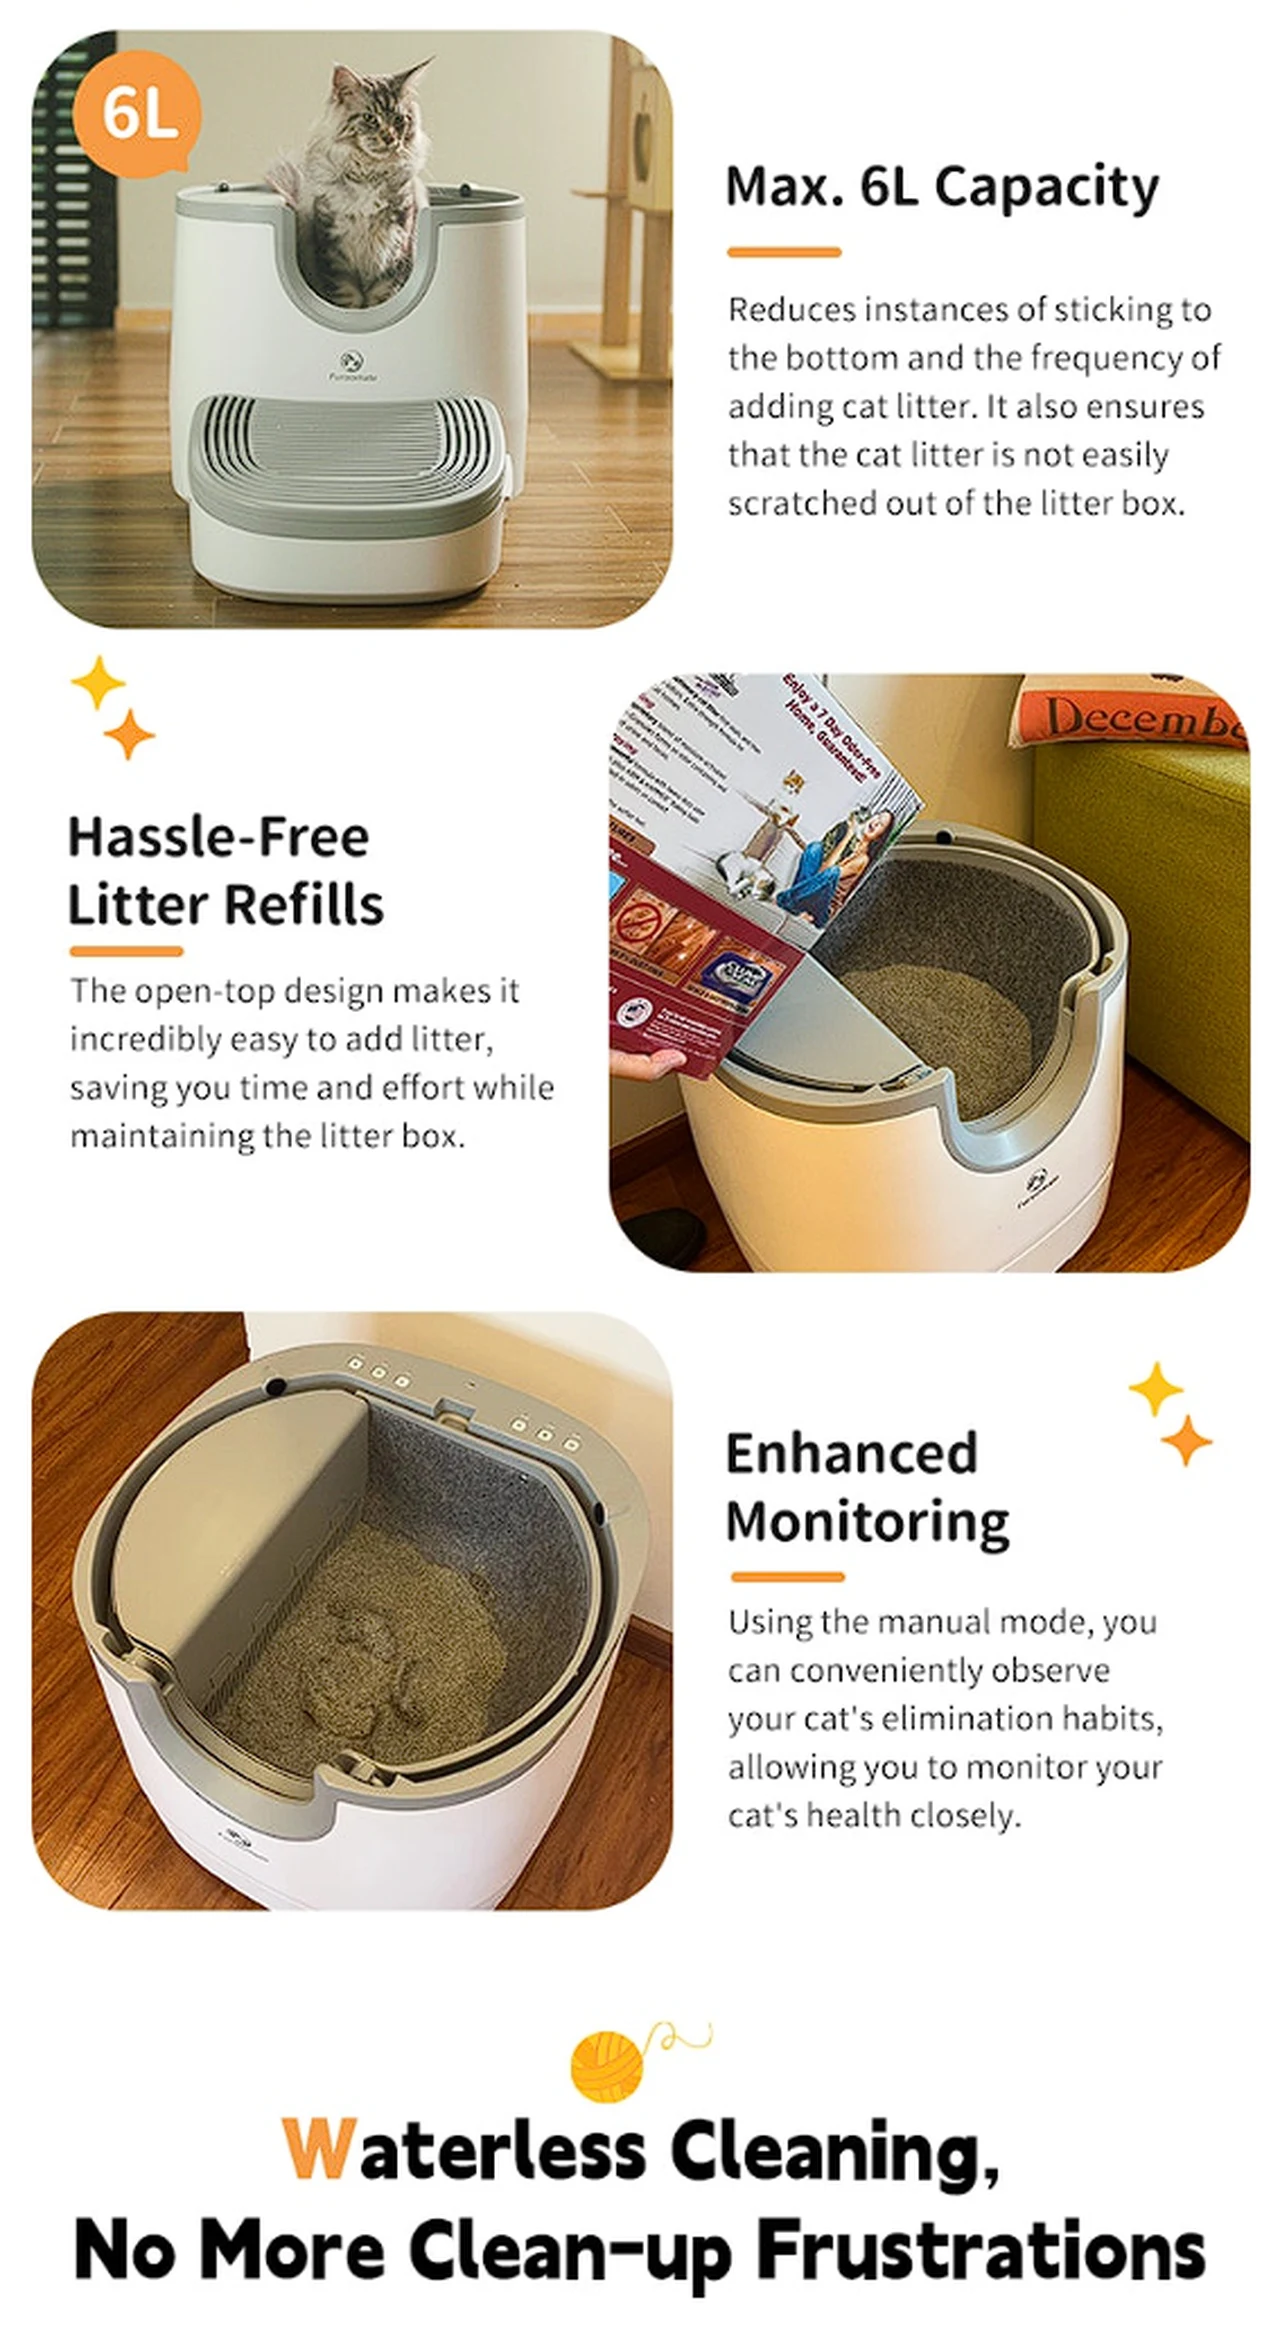 Furoomate self-cleaning cat litter box features